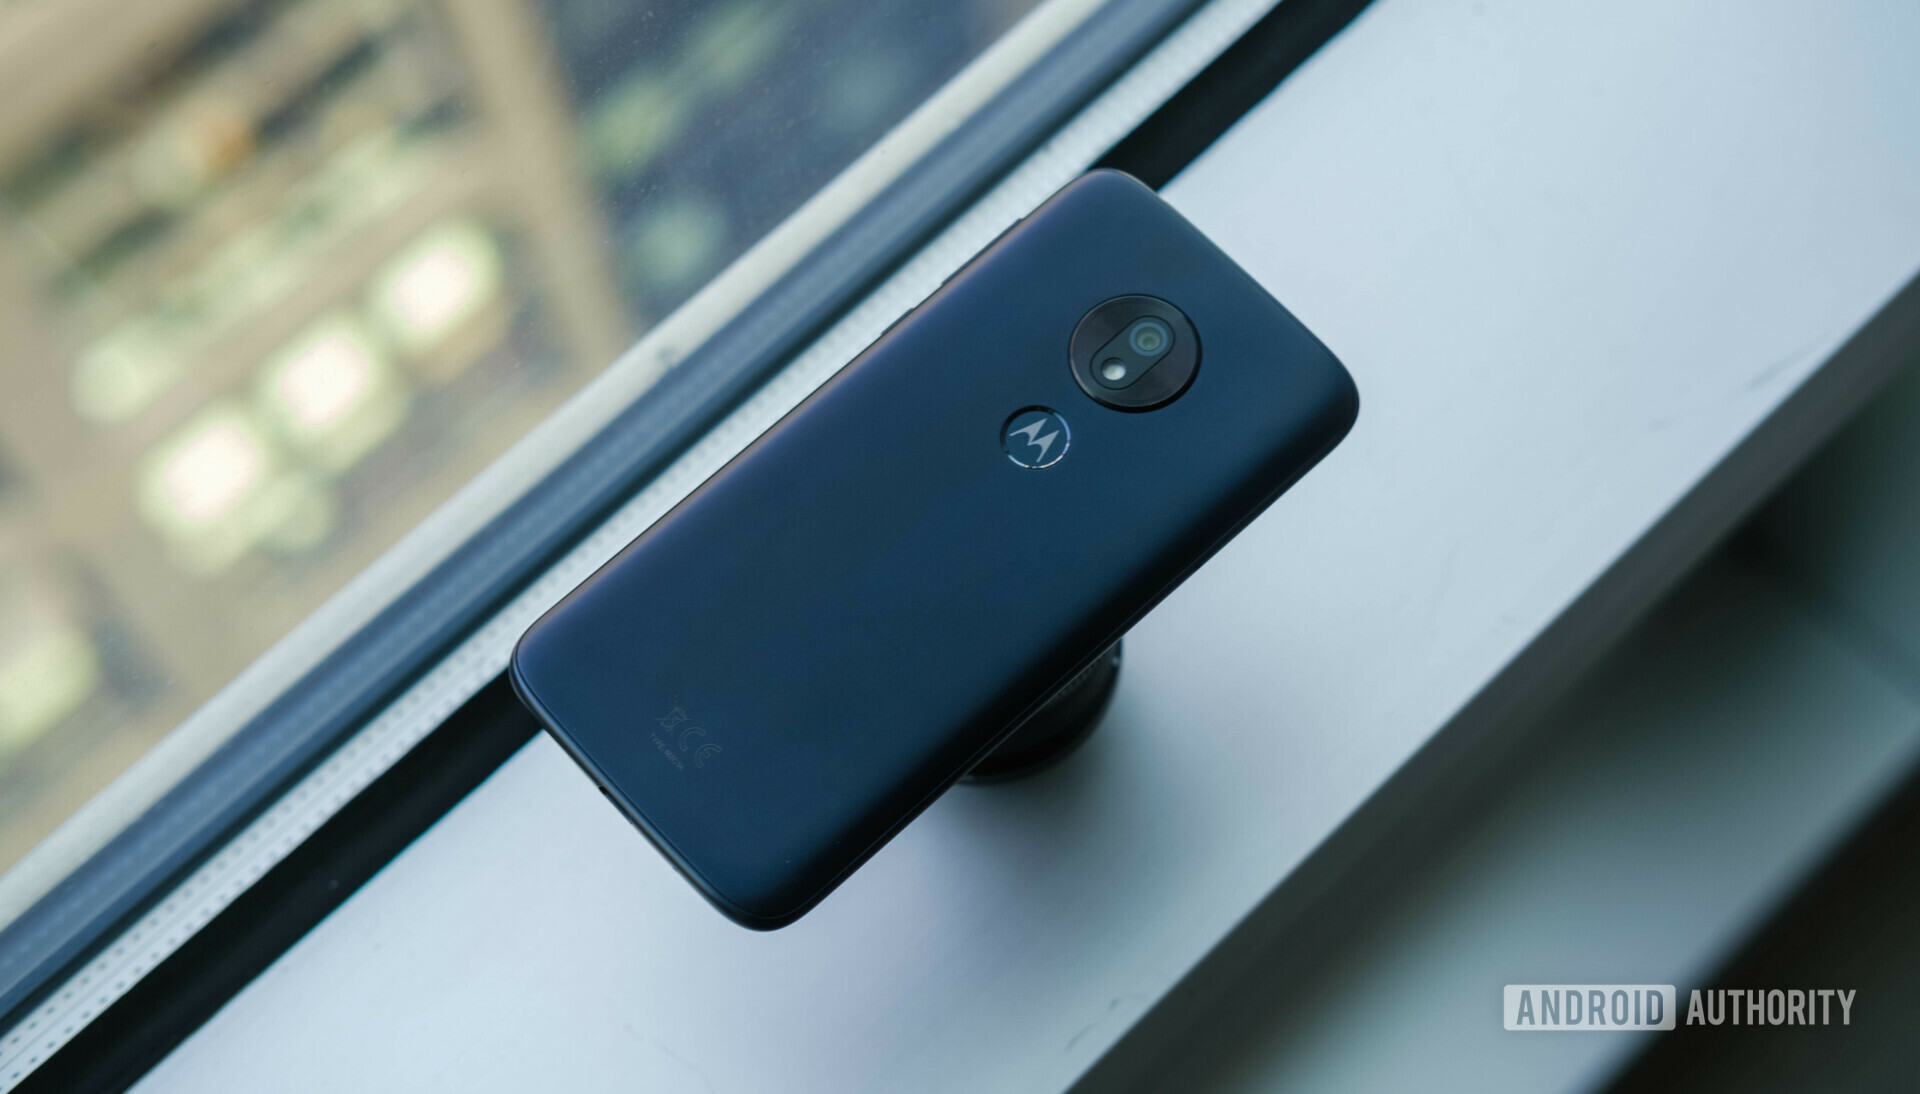 Backside of the new Motorola G7 Play in dark blue color laying face down in front of a window.